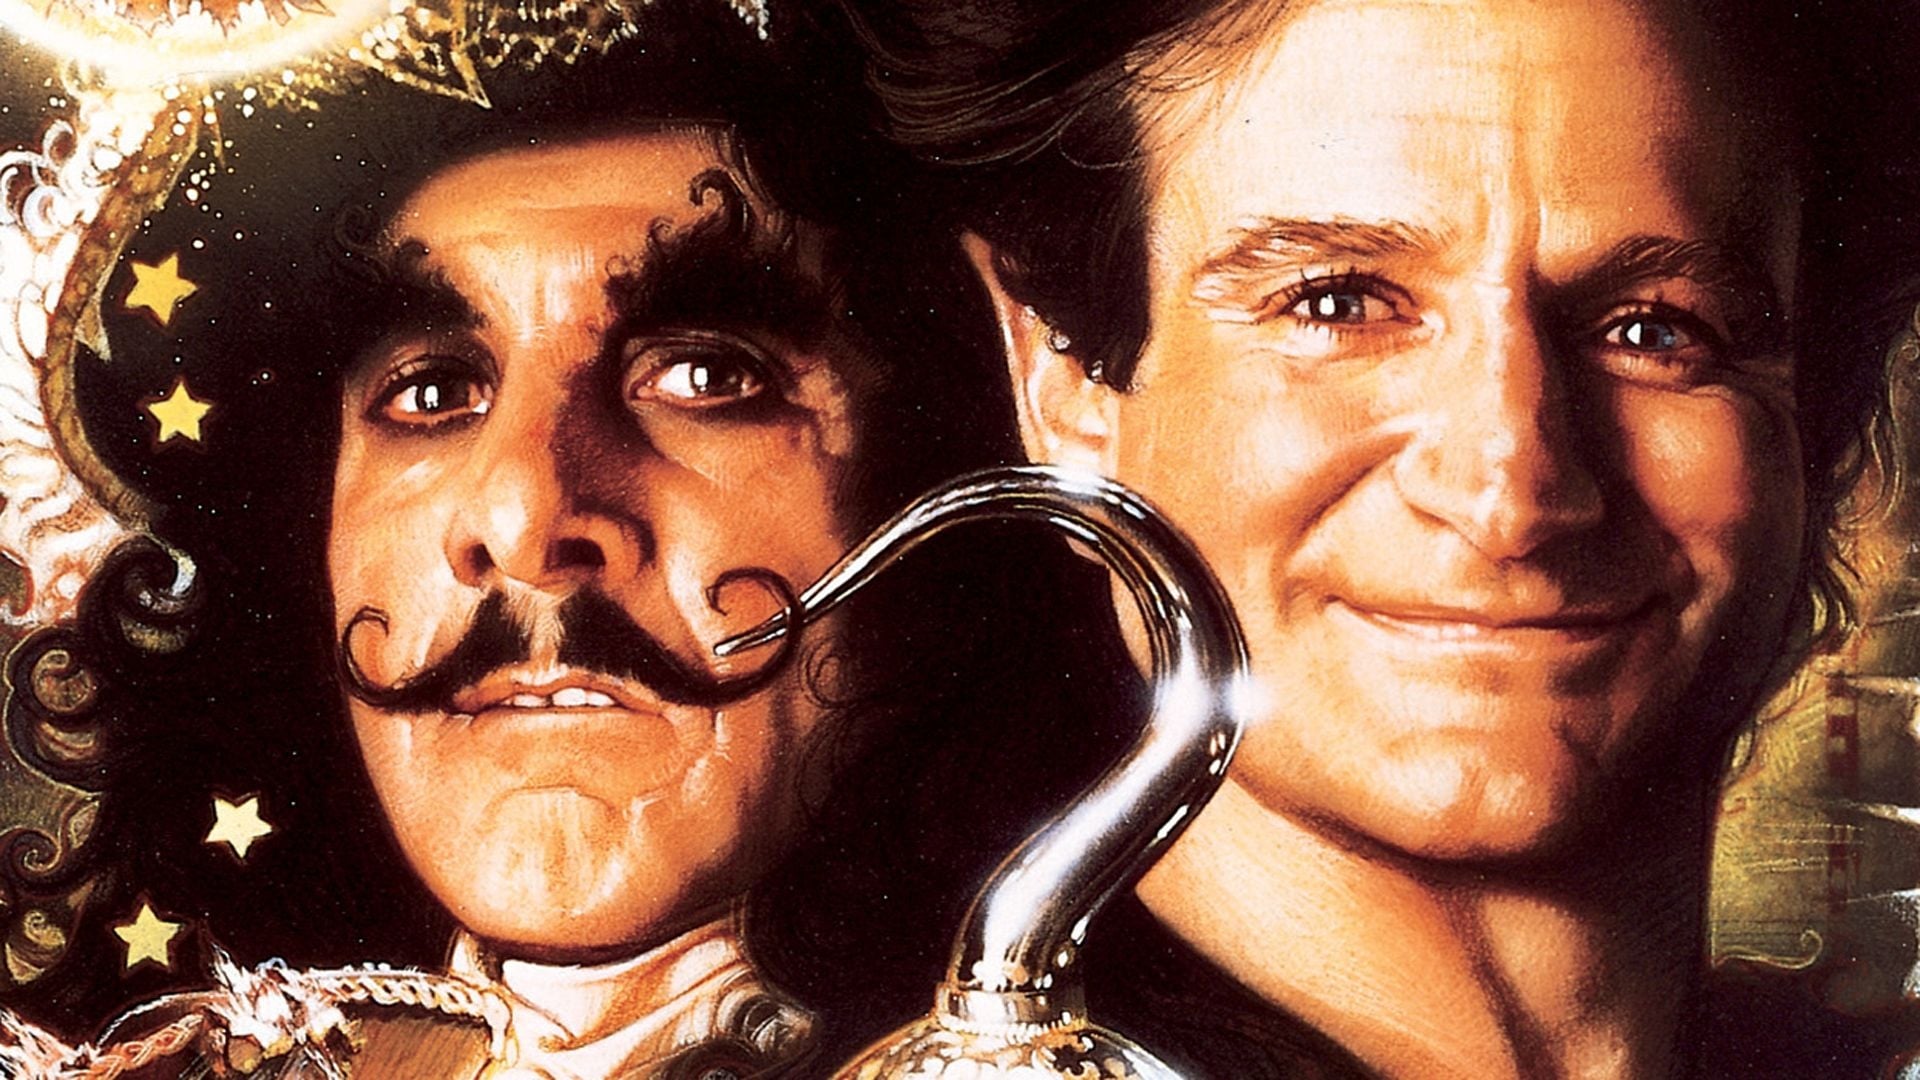 Still from the poster for the movie Hook showing Caption Hook and Peter Pan smiling. Between them is a hook